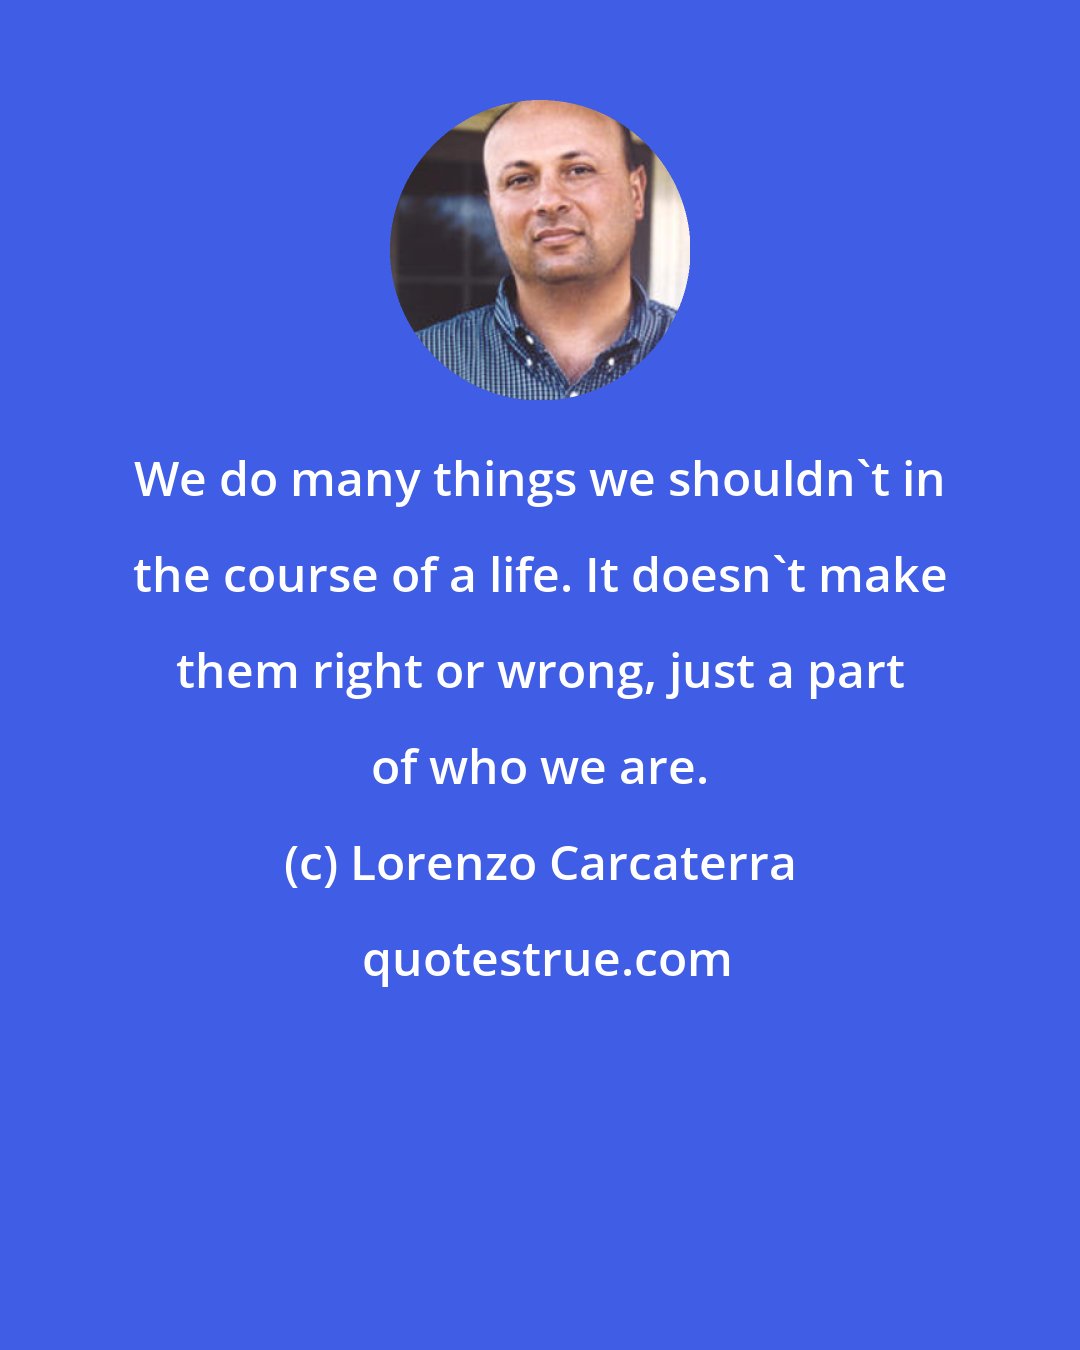 Lorenzo Carcaterra: We do many things we shouldn't in the course of a life. It doesn't make them right or wrong, just a part of who we are.